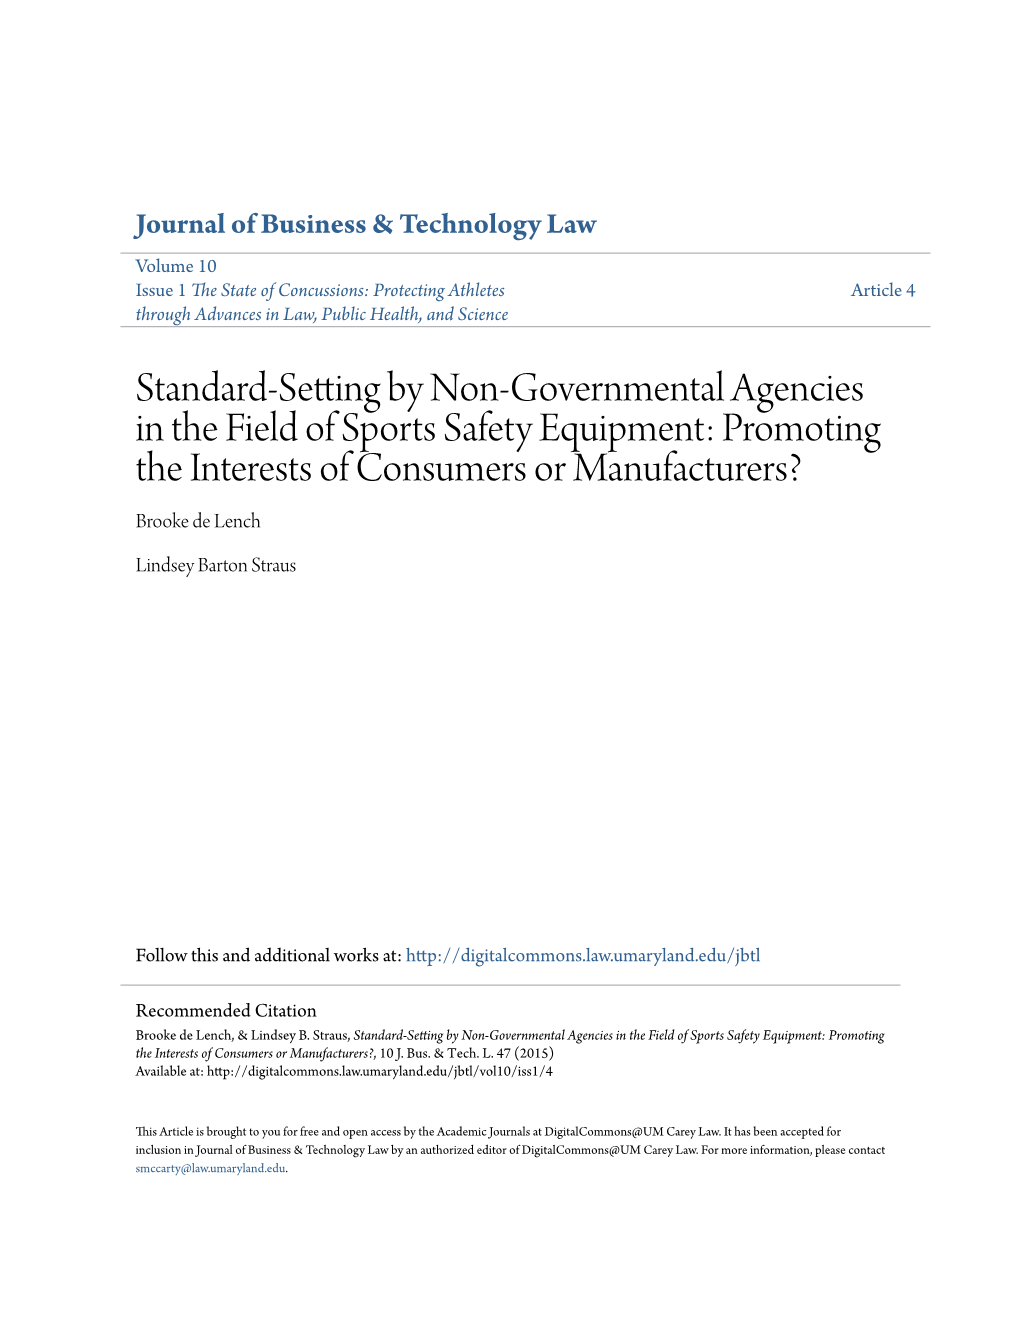 Standard-Setting by Non-Governmental Agencies in the Field of Sports Safety Equipment: Promoting the Interests of Consumers Or Manufacturers? Brooke De Lench